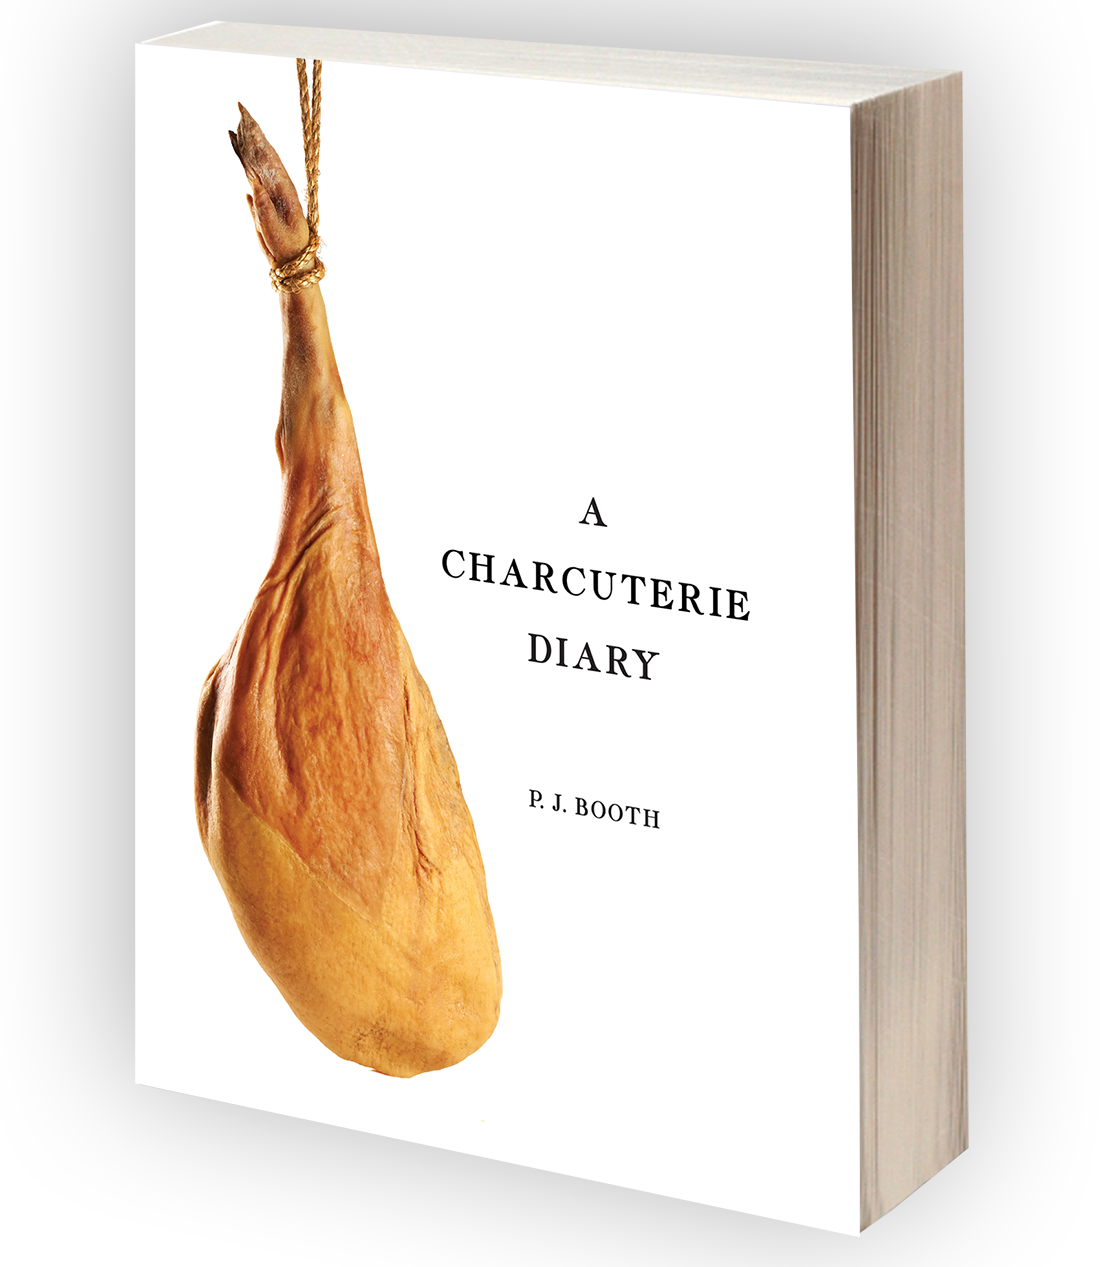 Dinner with “The Charcuterie Diary” & “Squeal” author Peter Booth